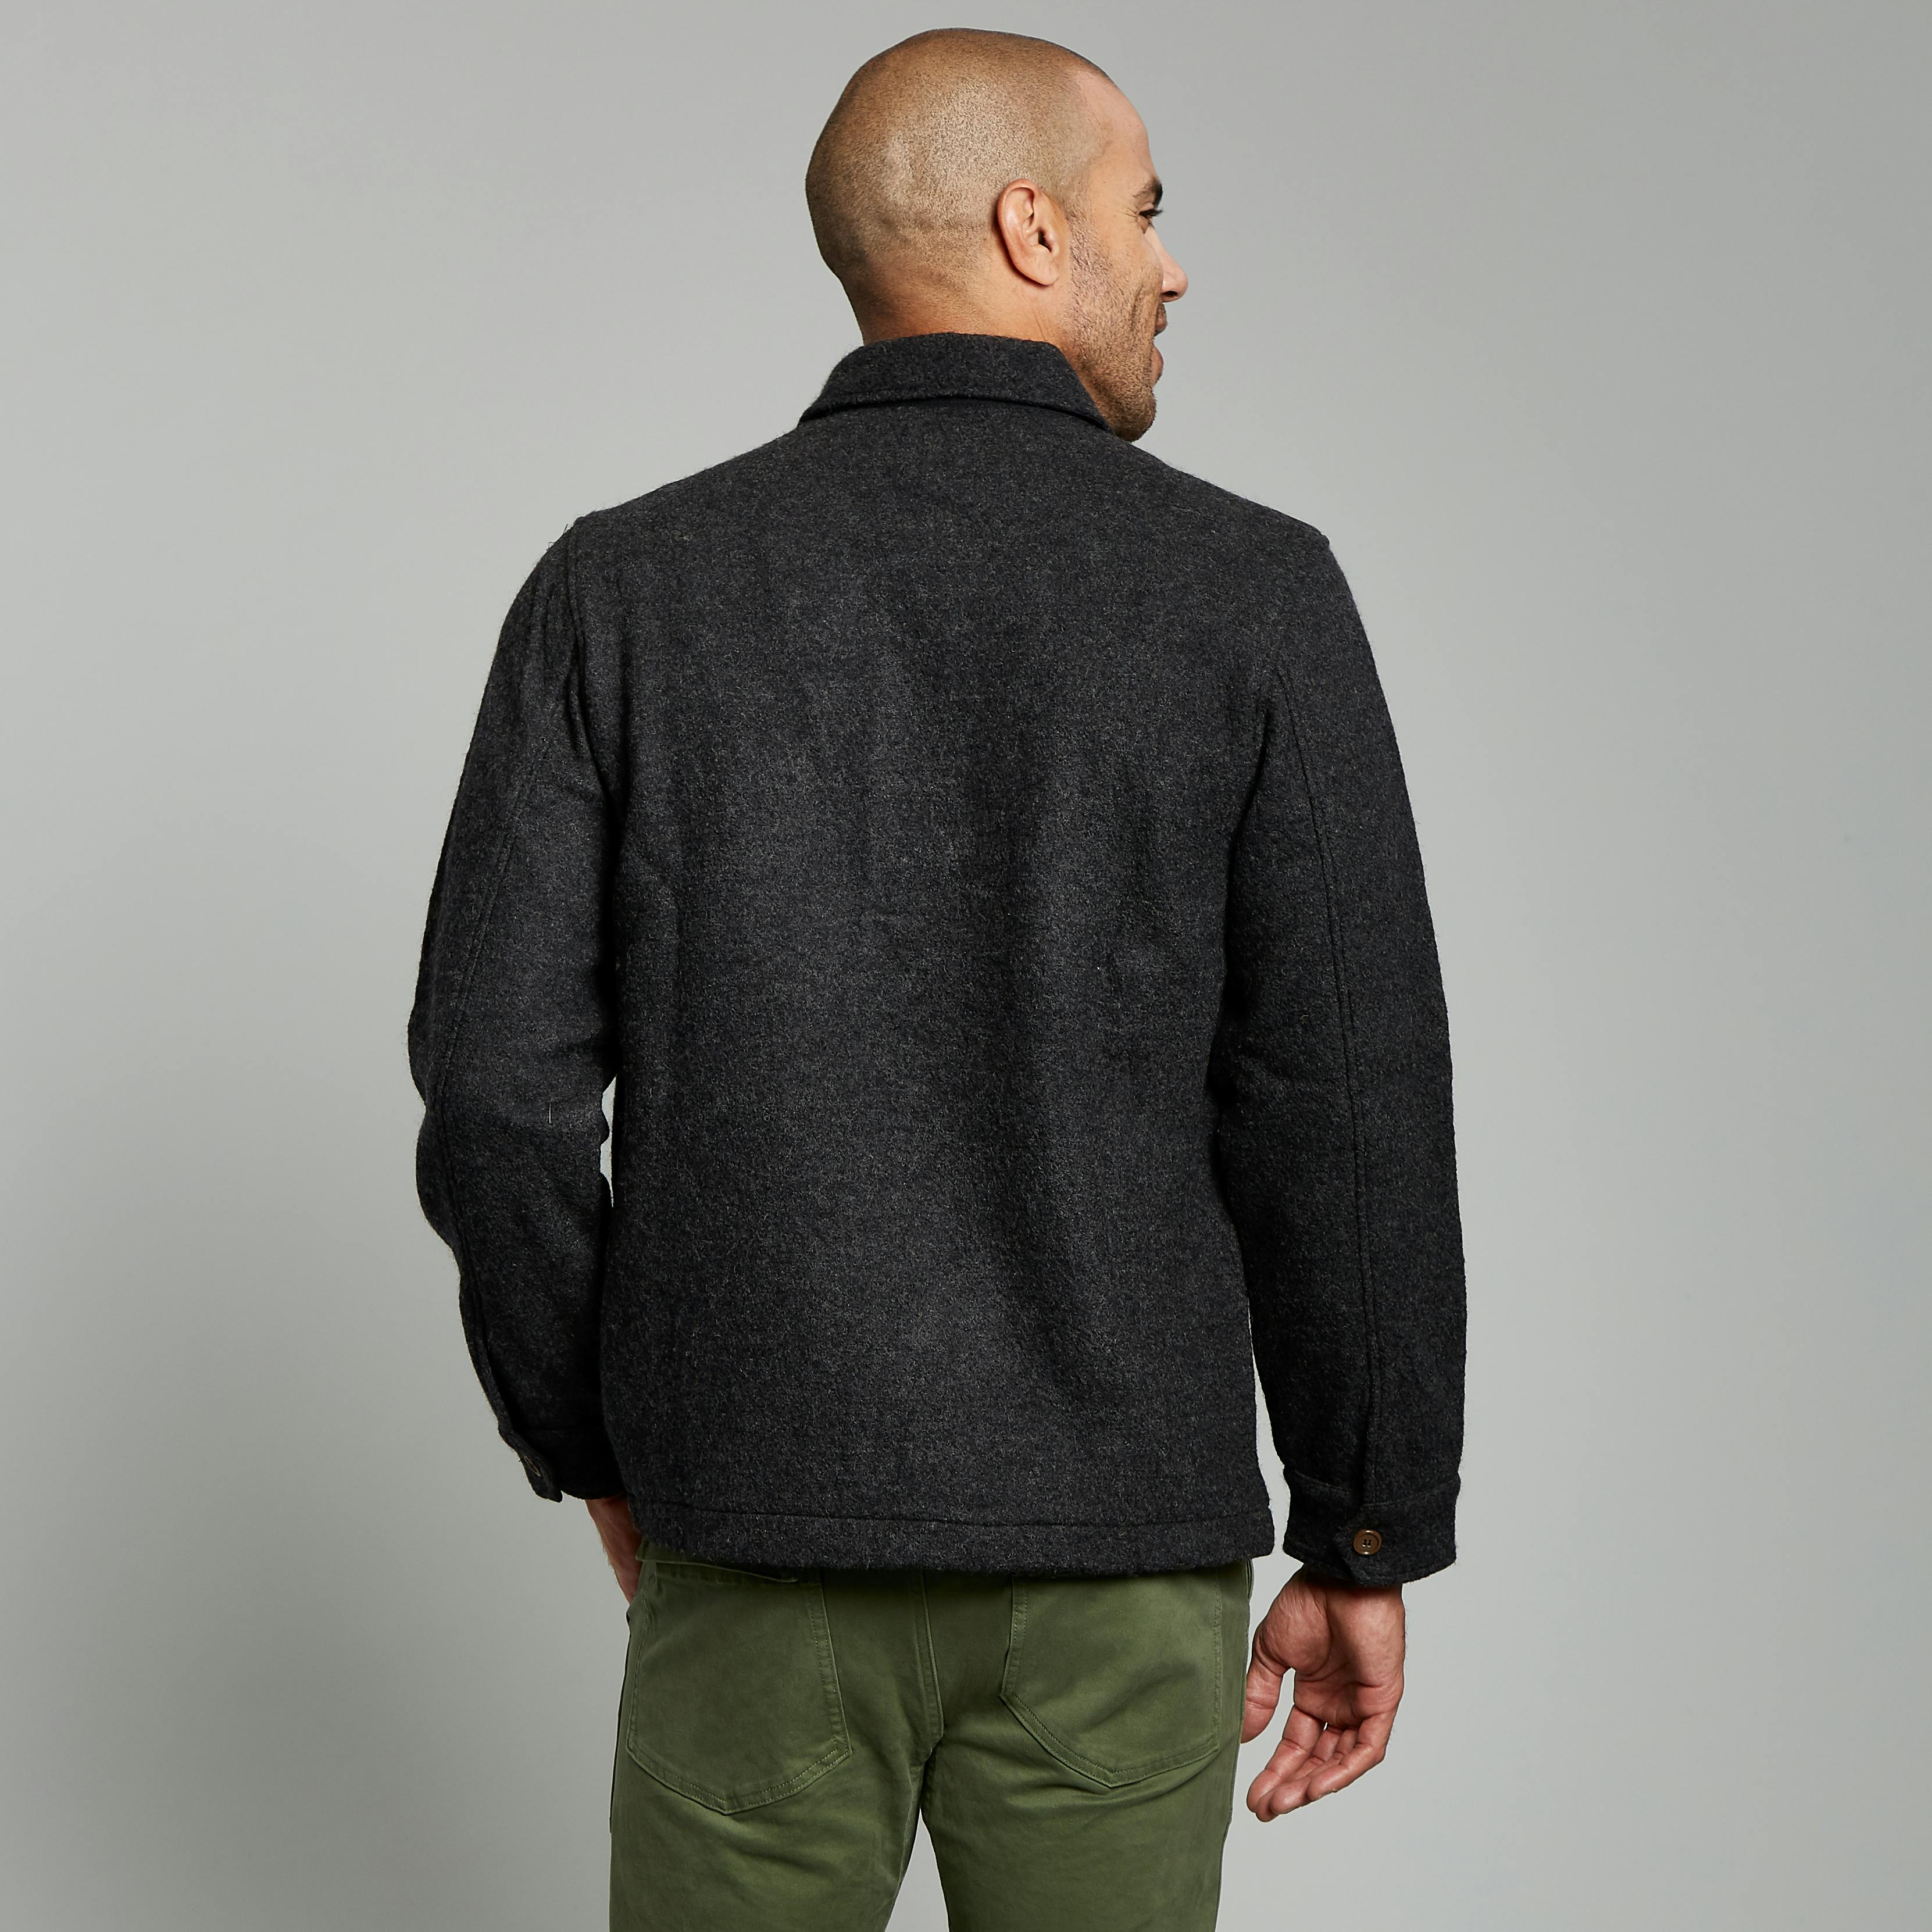 Todd Snyder Italian Boucle Knit Shirt Jacket - Charcoal